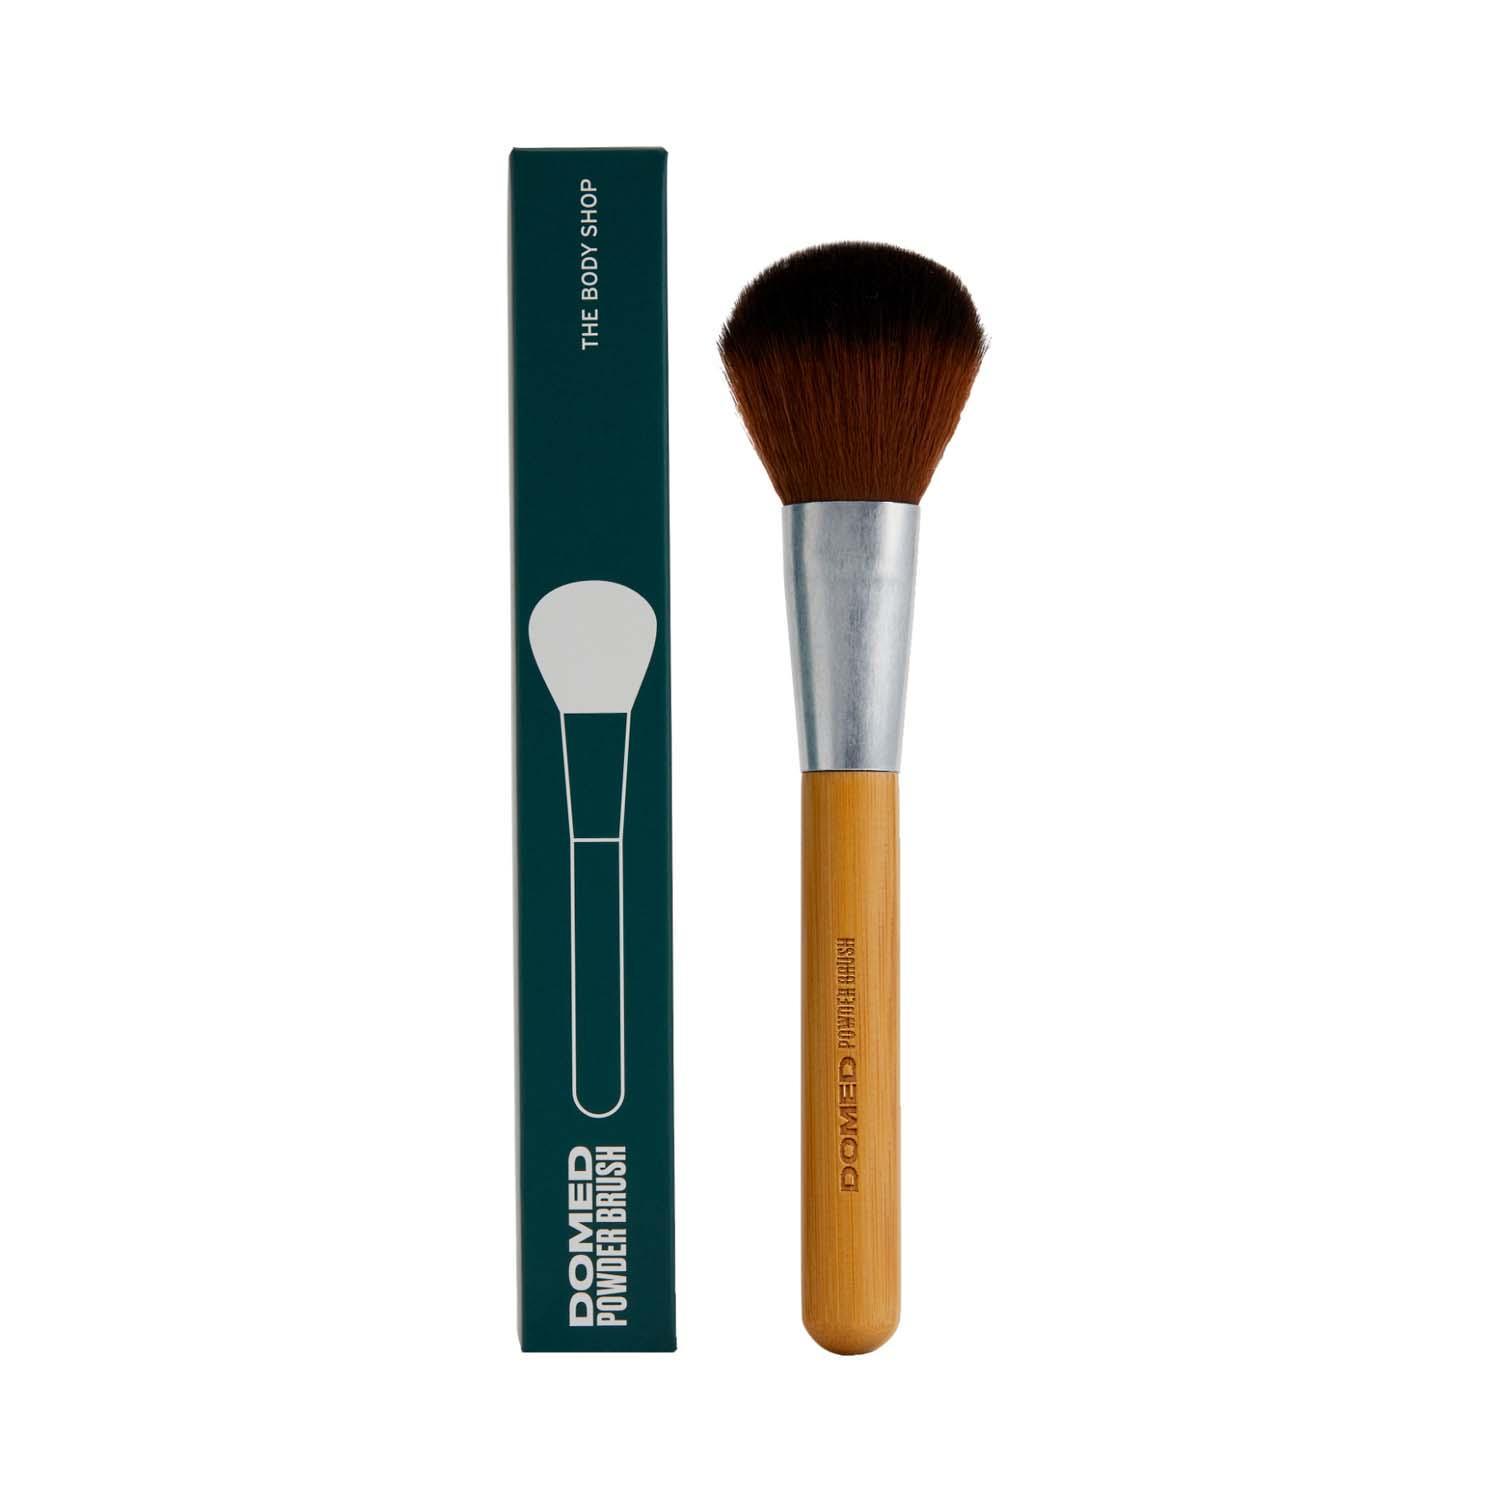 the body shop domed powder face brush